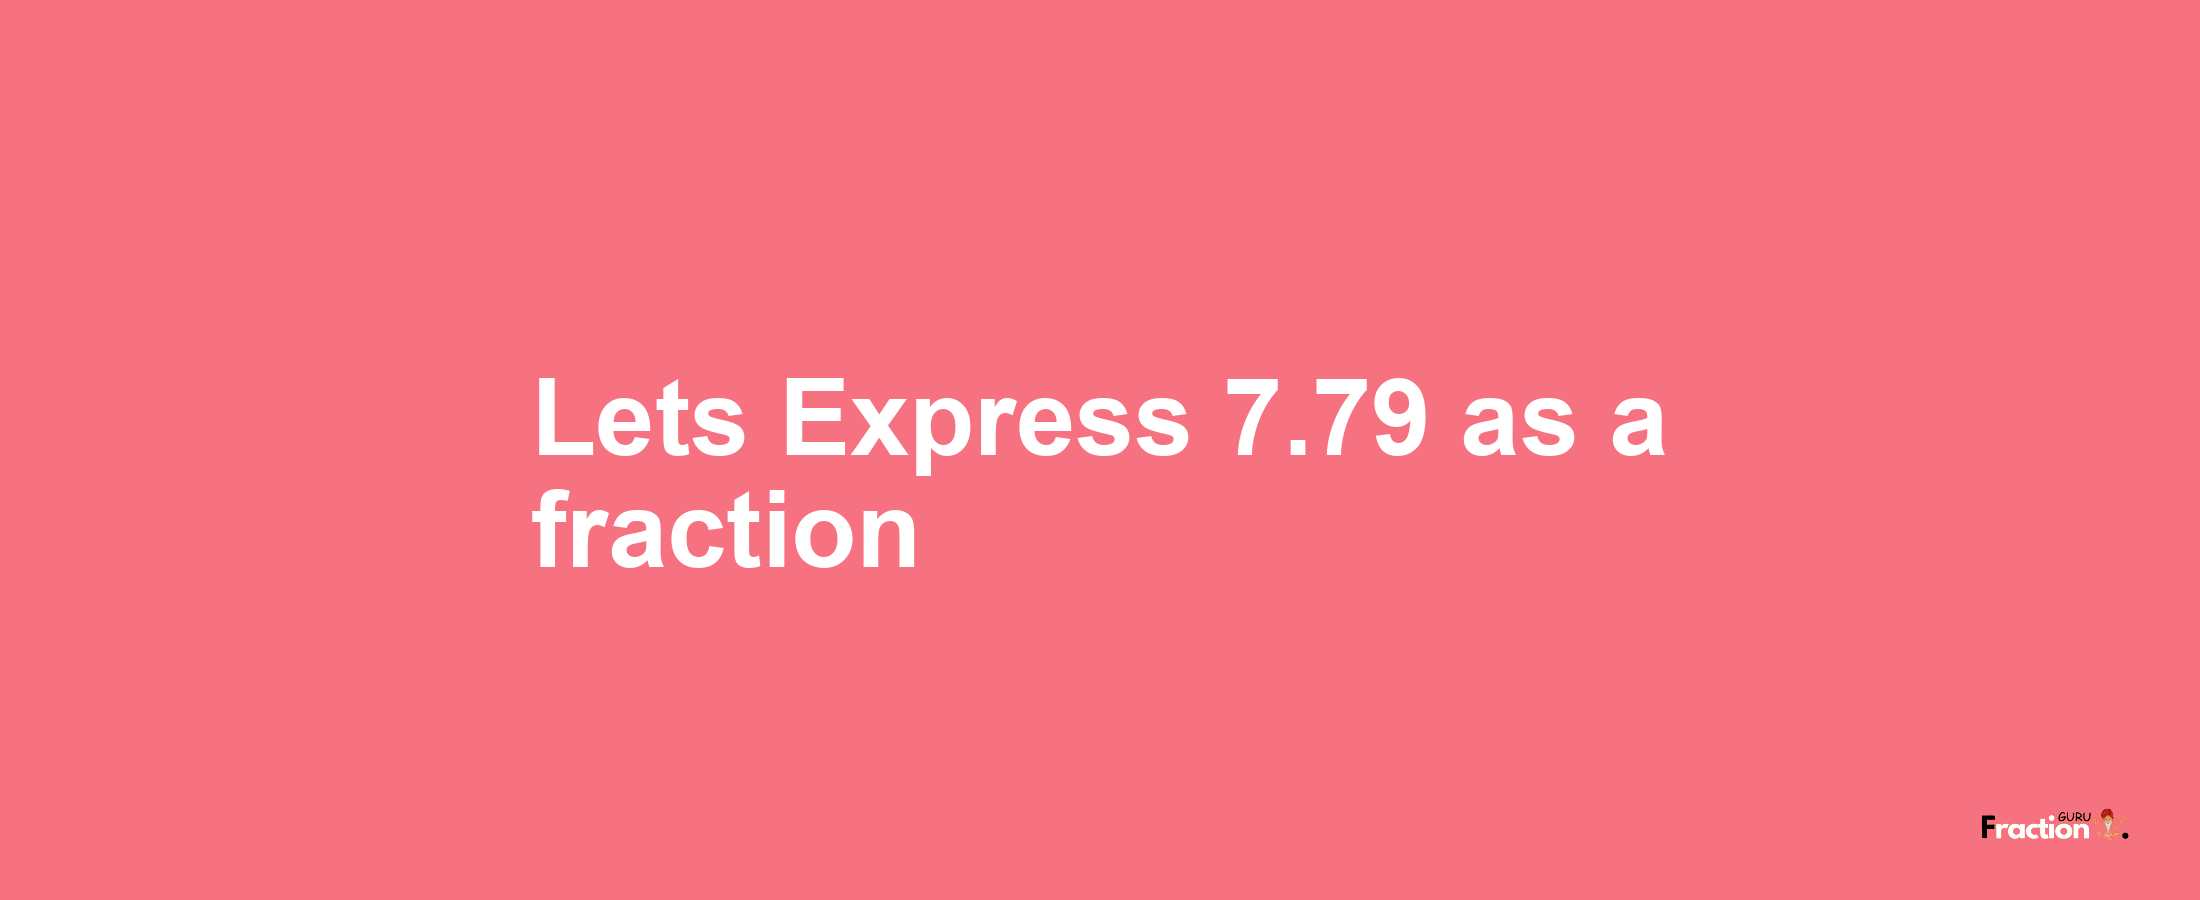 Lets Express 7.79 as afraction